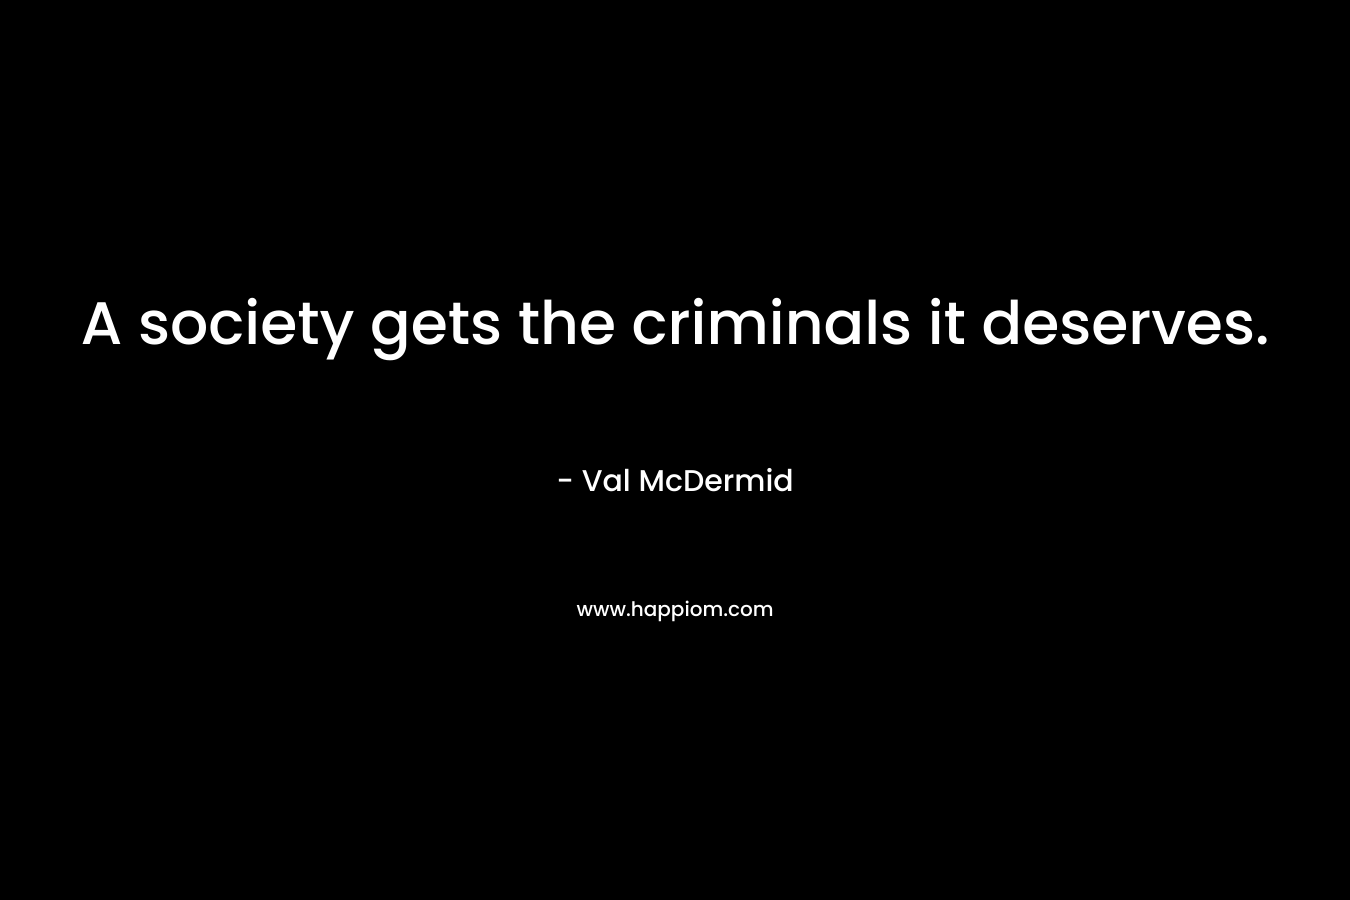 A society gets the criminals it deserves. – Val McDermid